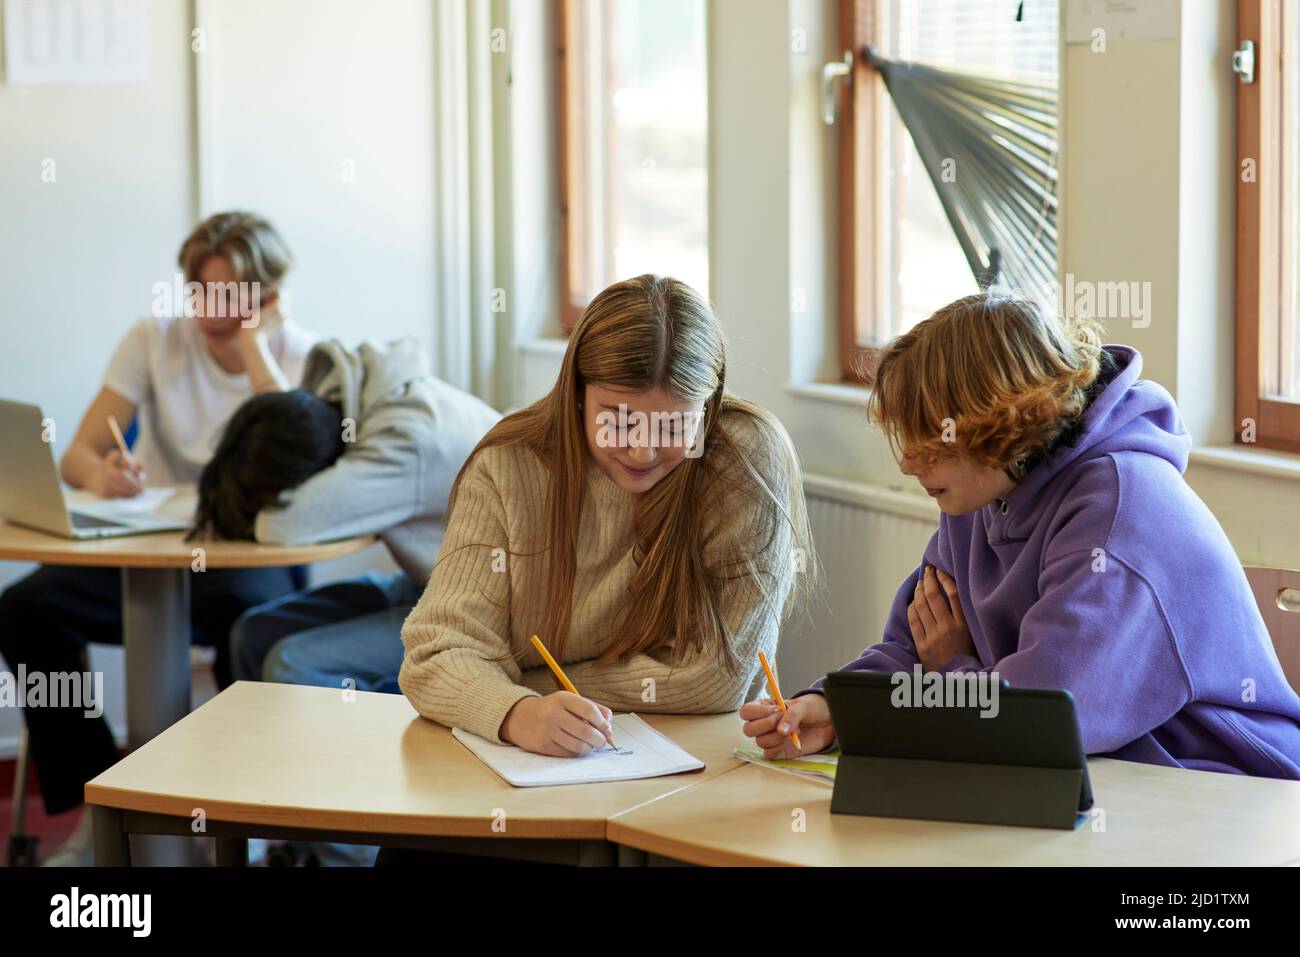 Group of students taking notes in class Stock Photo